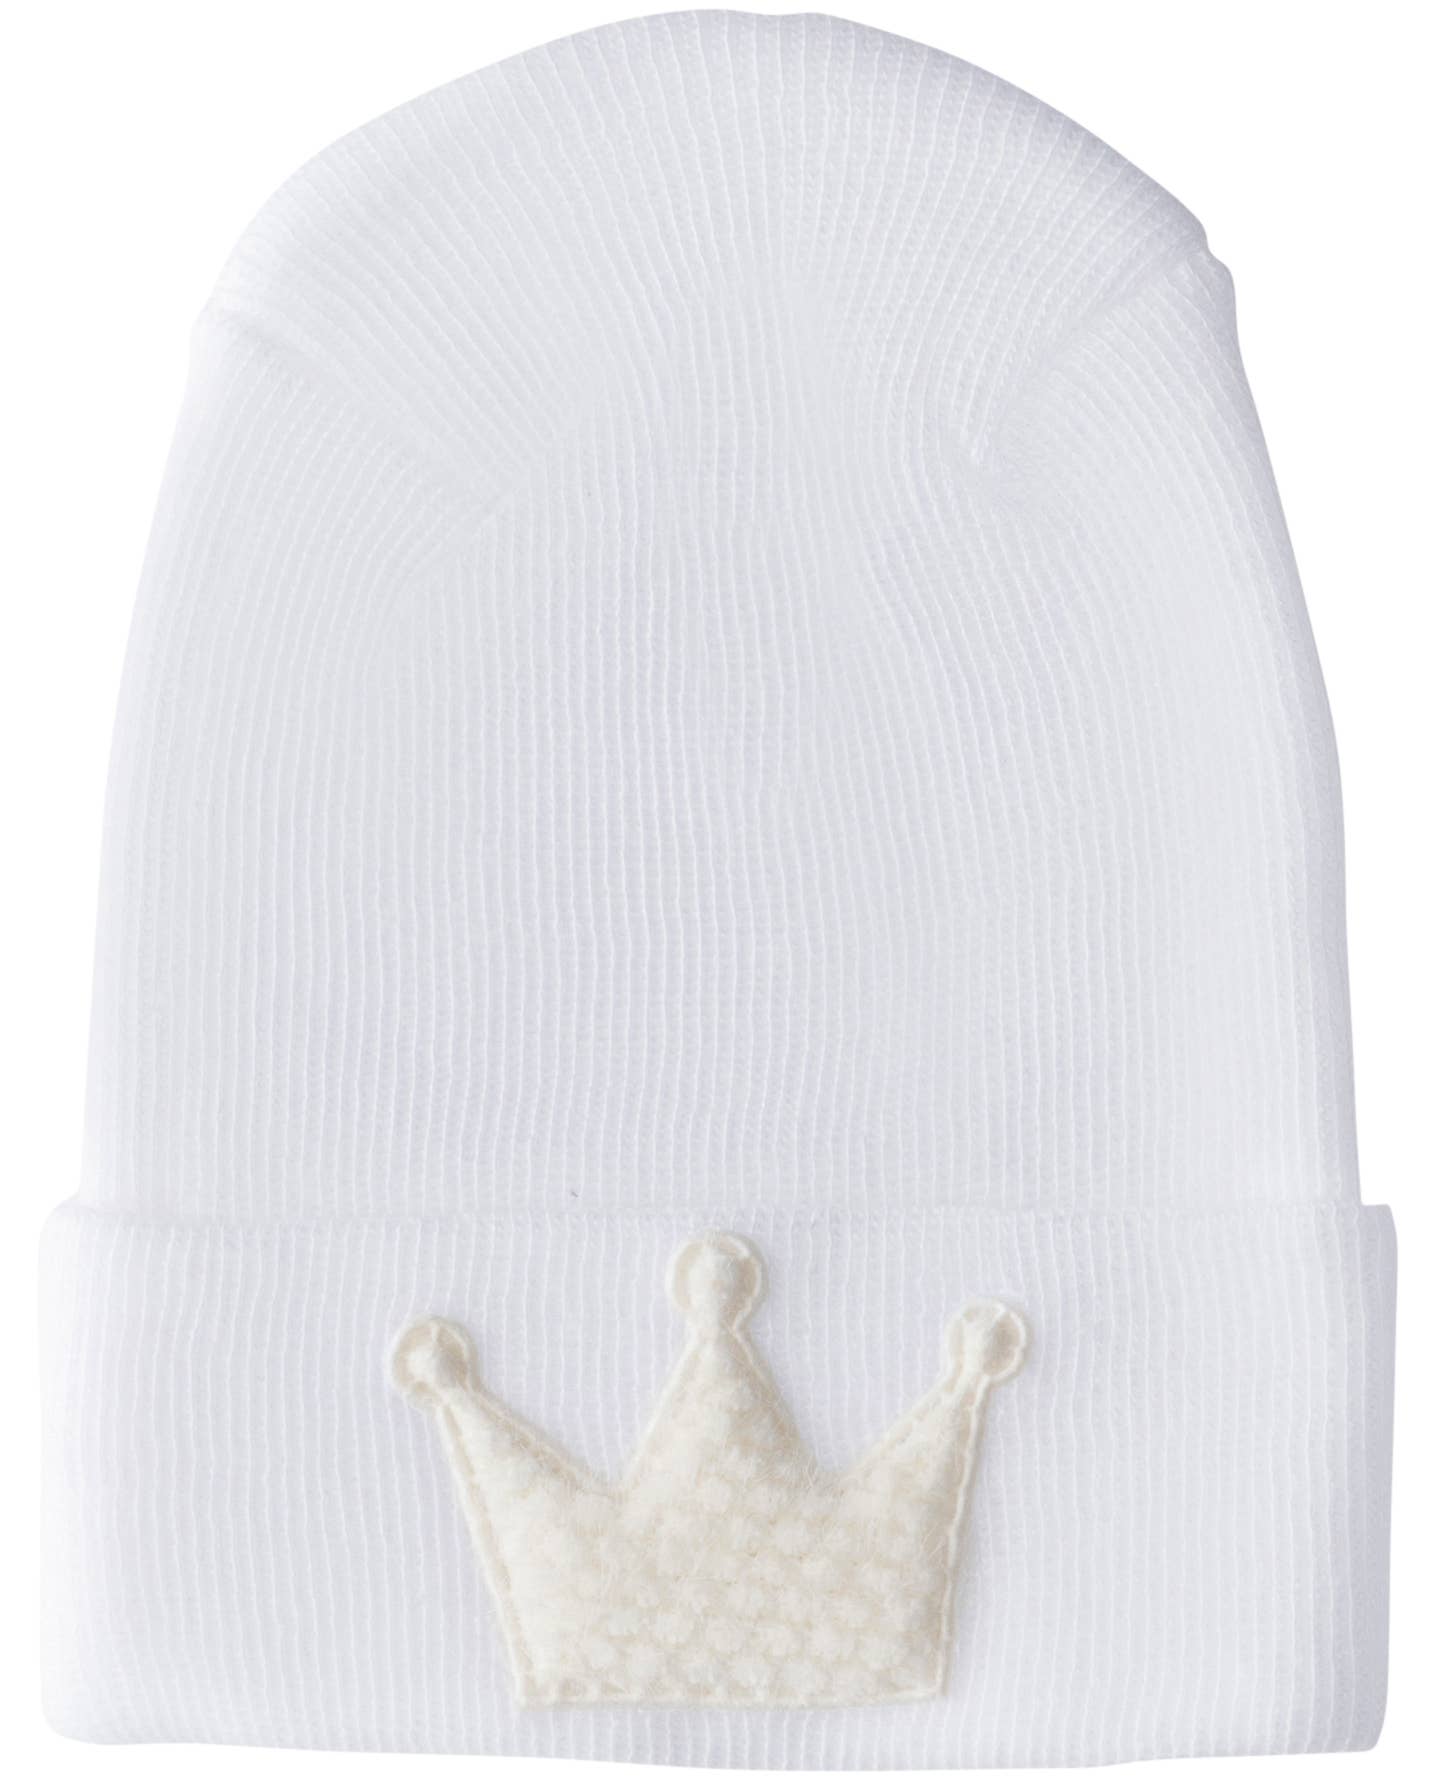 White  Hospital Hat With Ivory Fuzzy Crown 